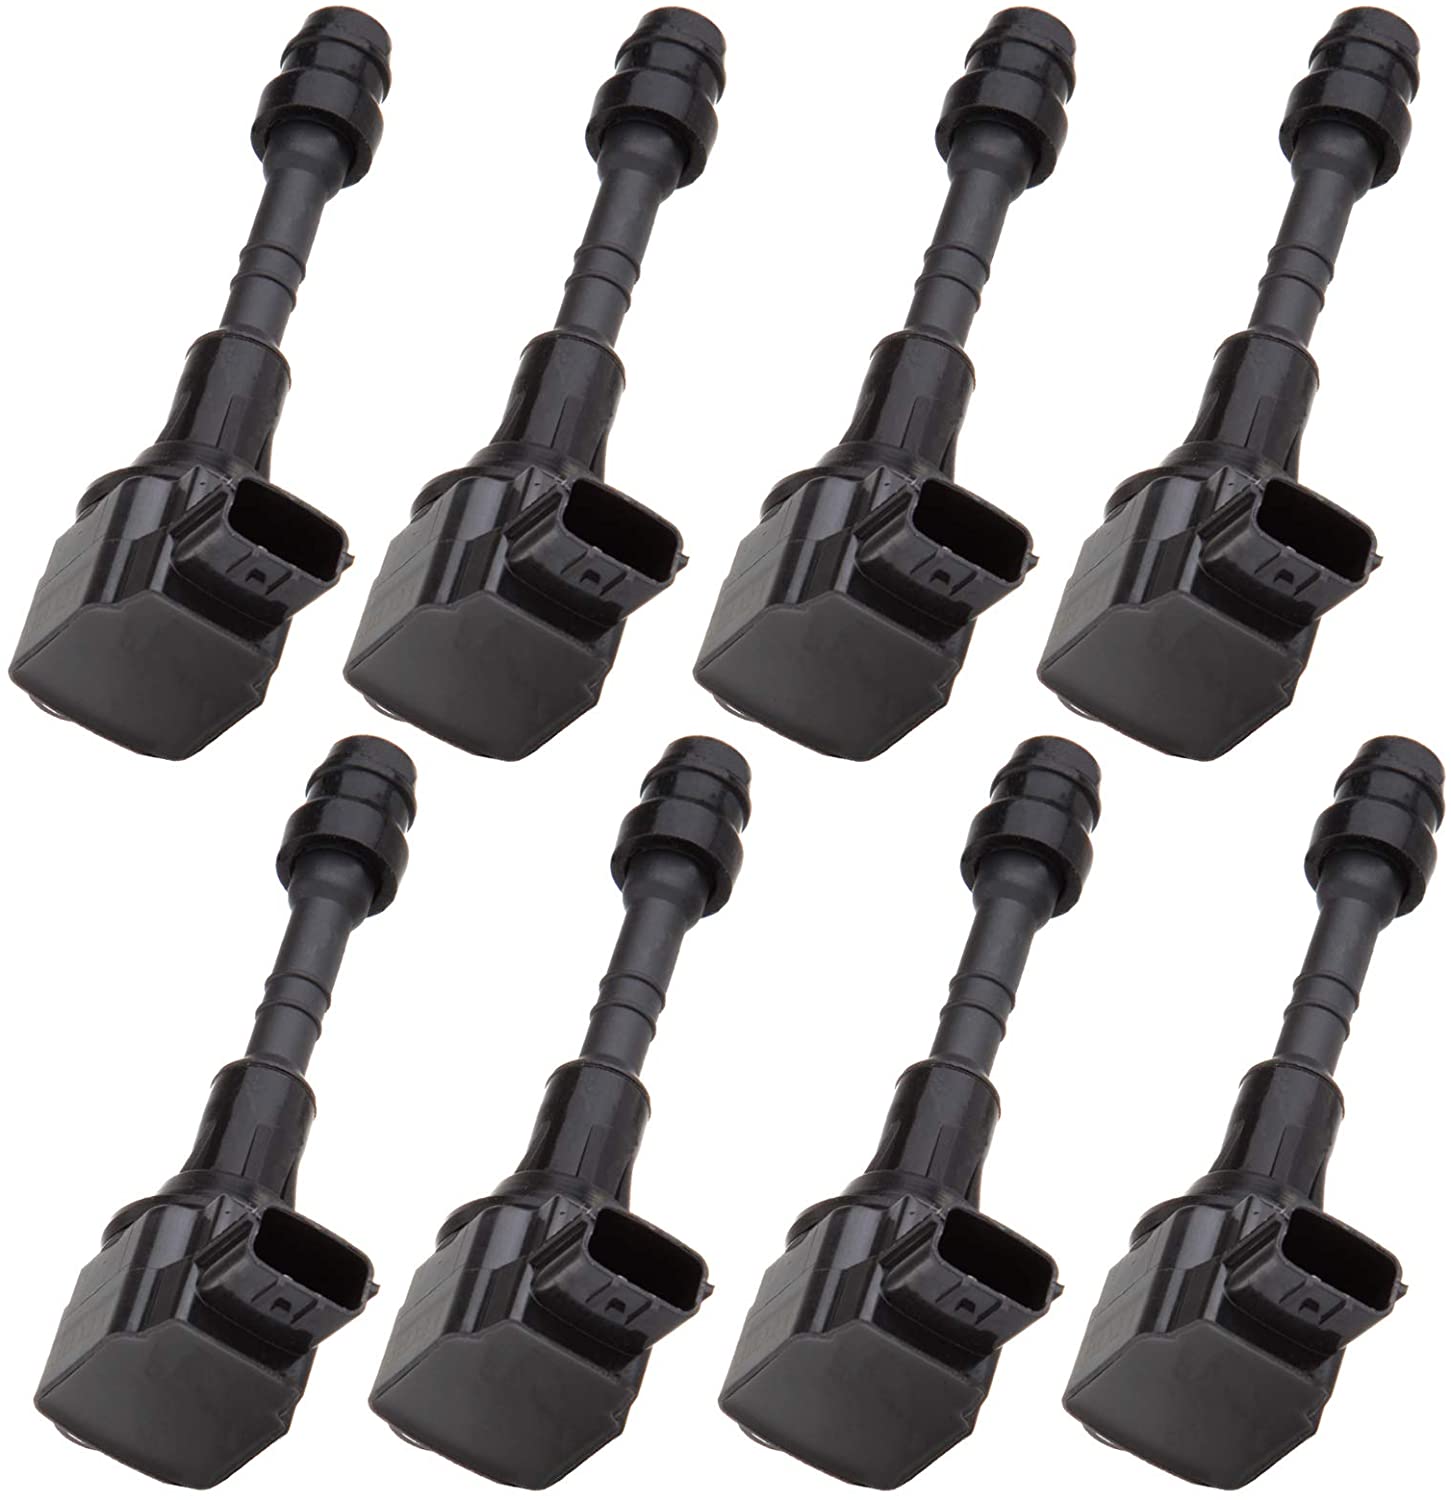 ROADFAR Pack of 8 Ignition Coils UF510 Fit for Nissa-n Armada 2004-2006/Titan Infiniti/ QX56 Equivalent with OE: C1483